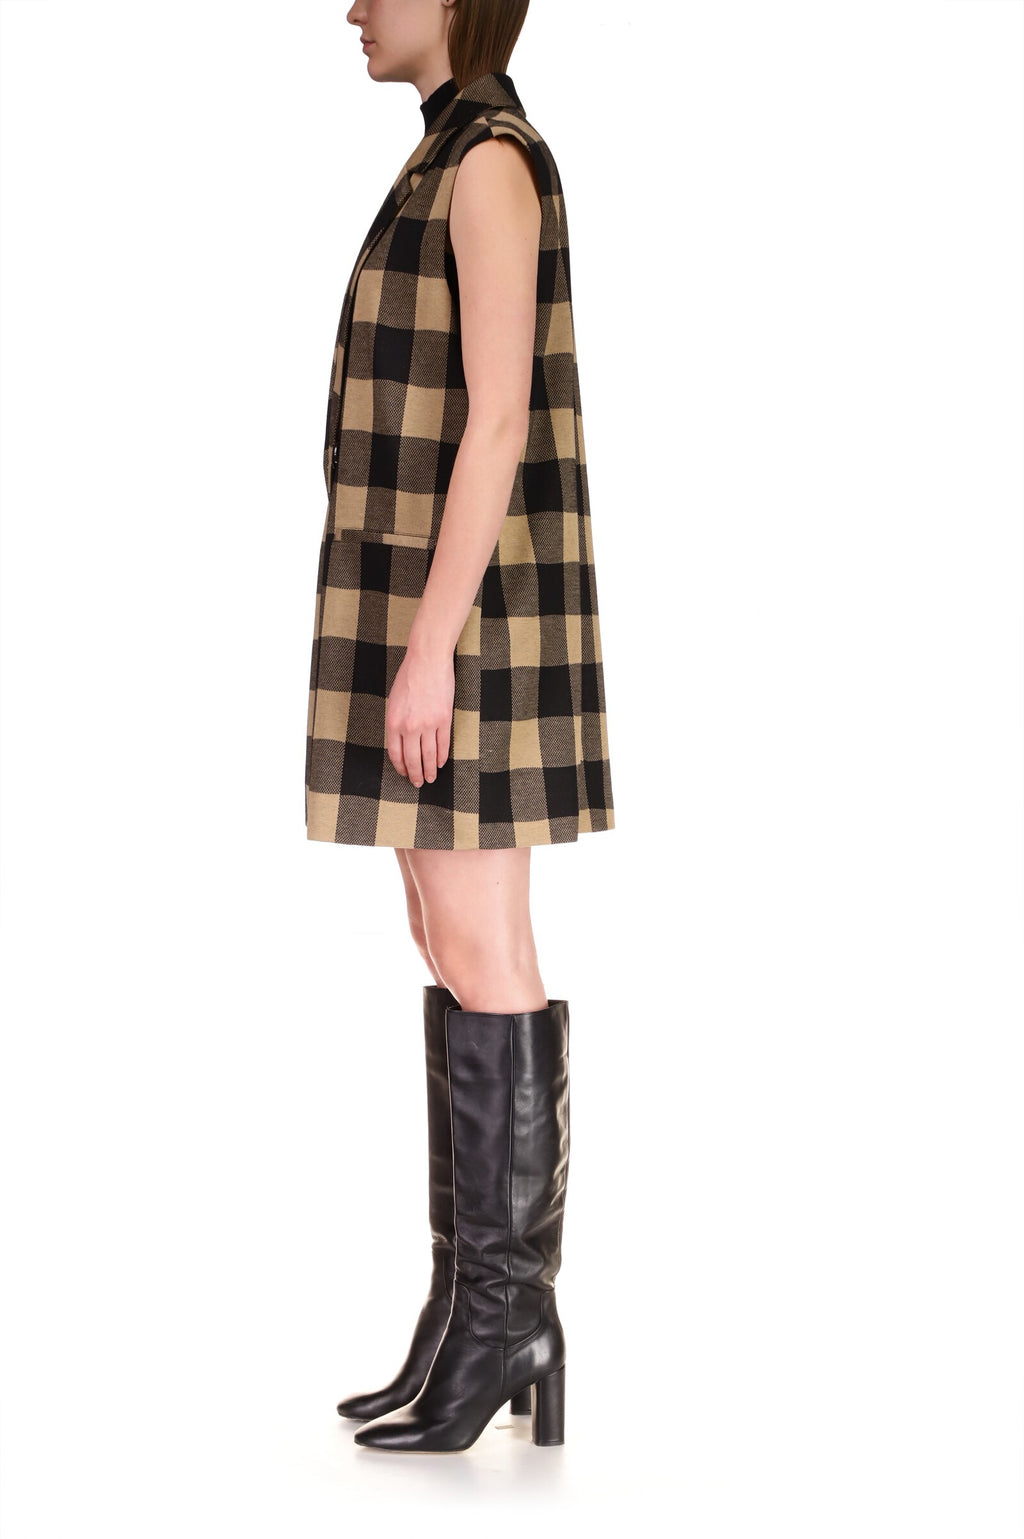 Carlyle Tan and Black Plaid Gilet ***Final Sale***